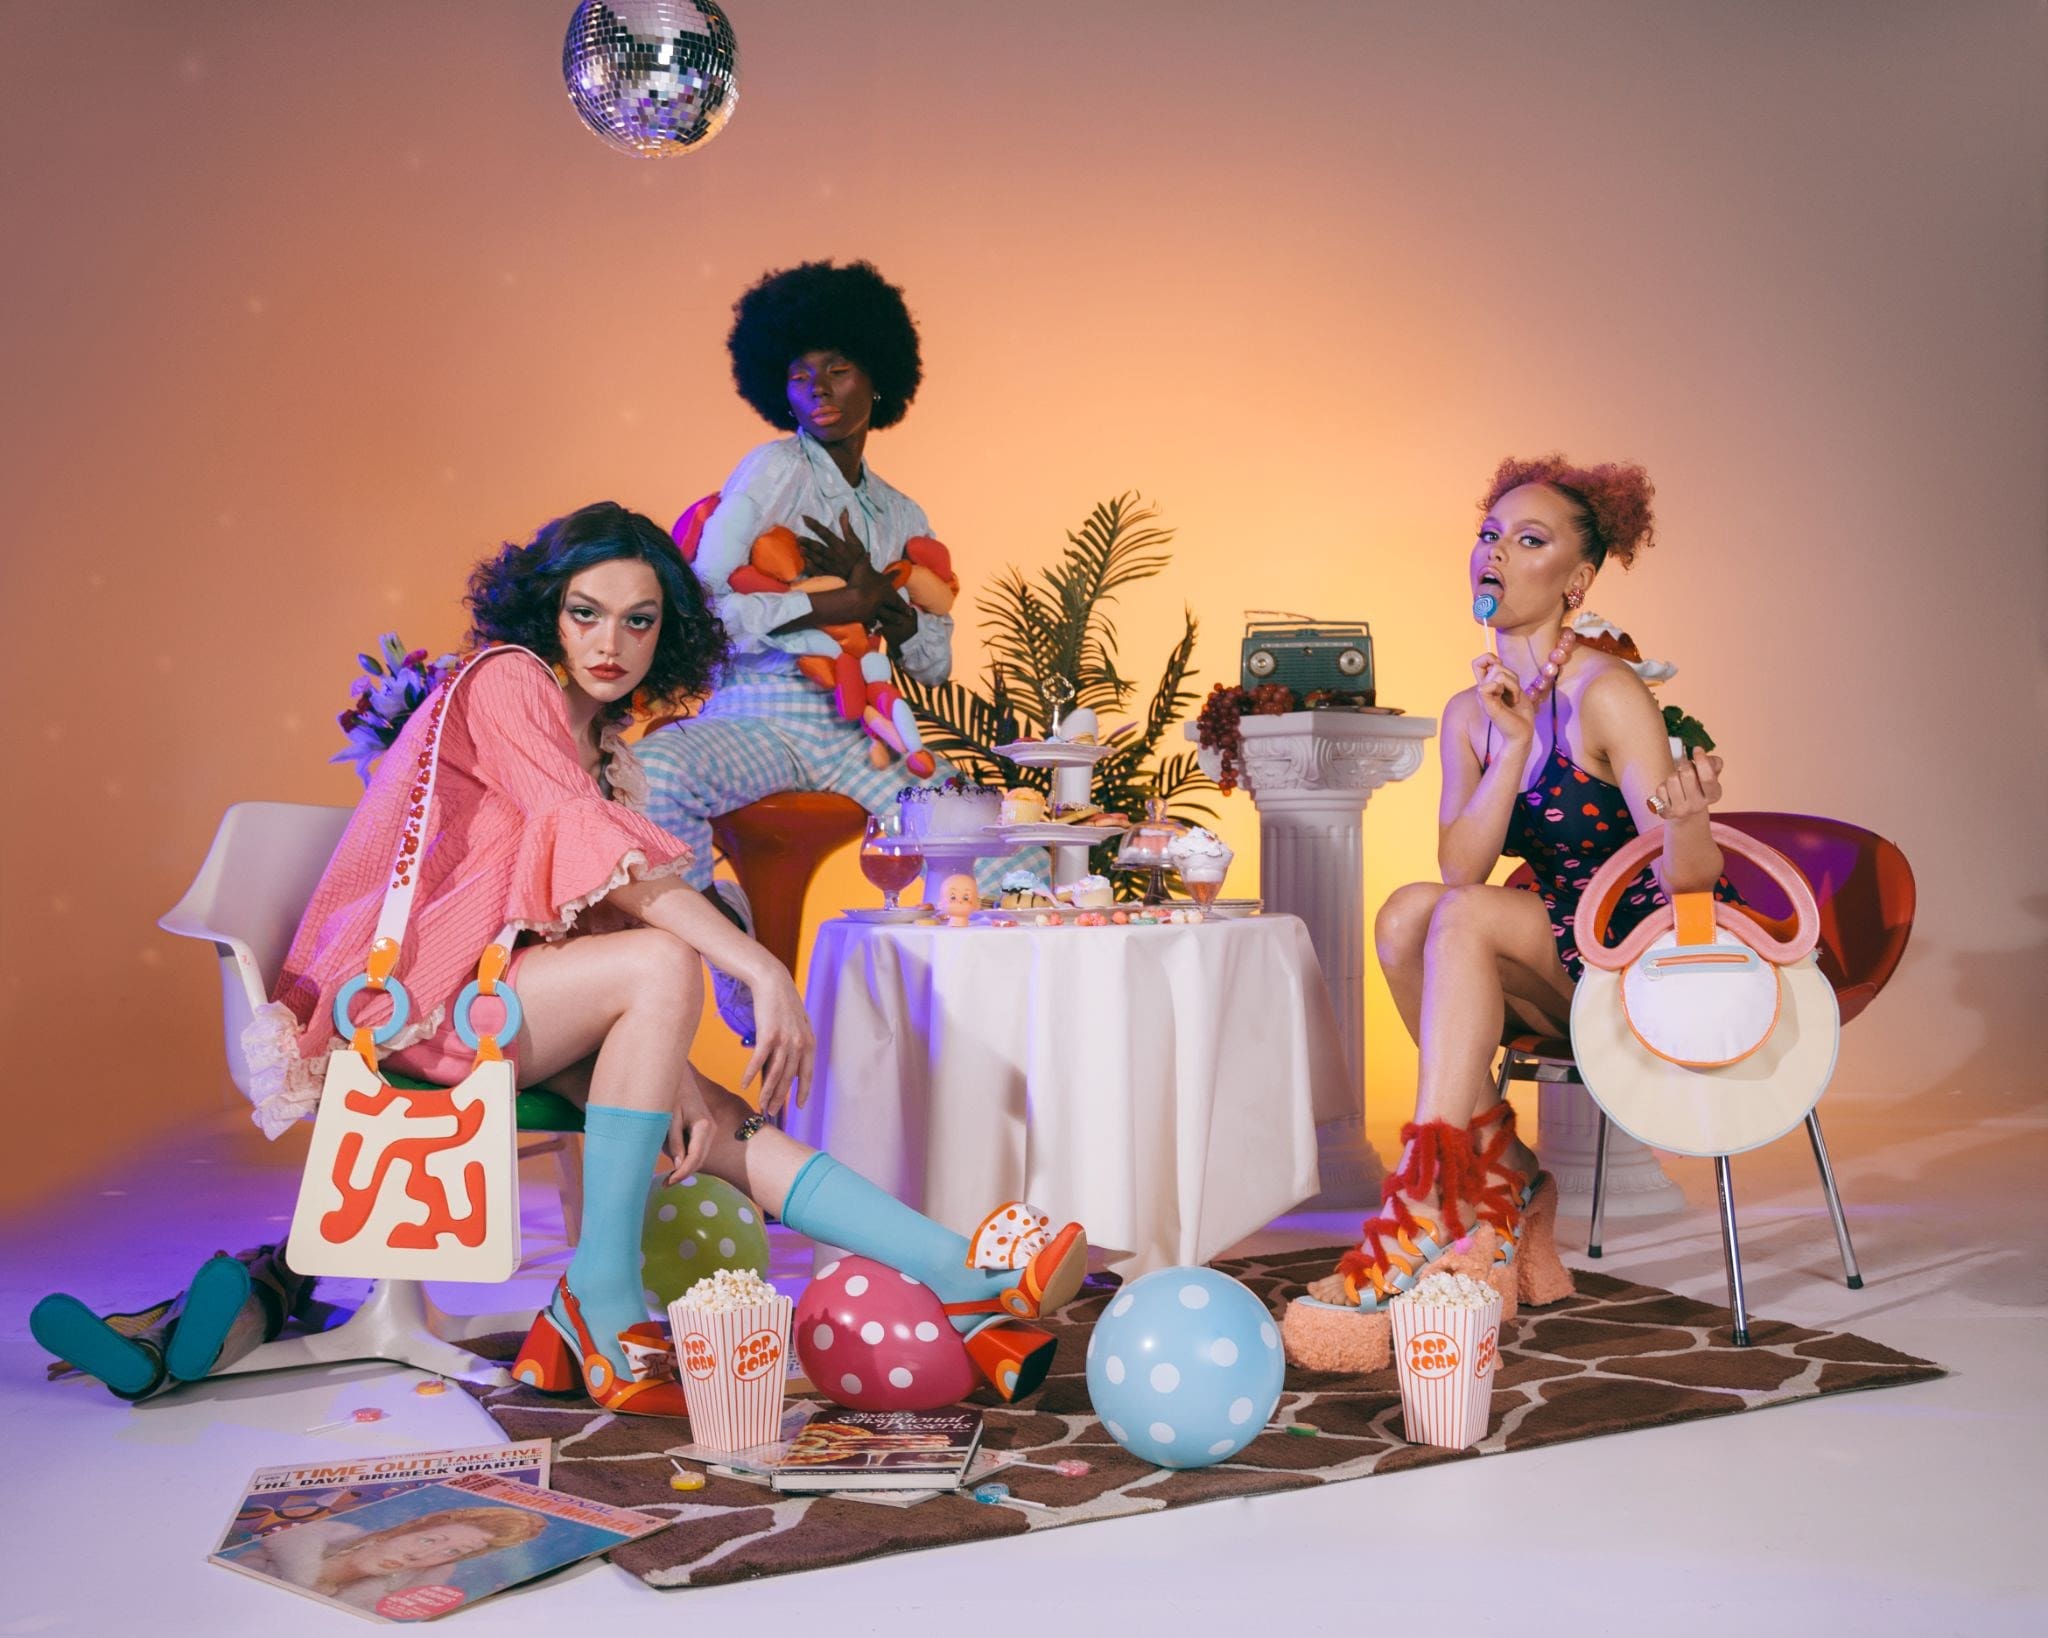 A still photograph of fashion models posed around an abstract dinner table setting